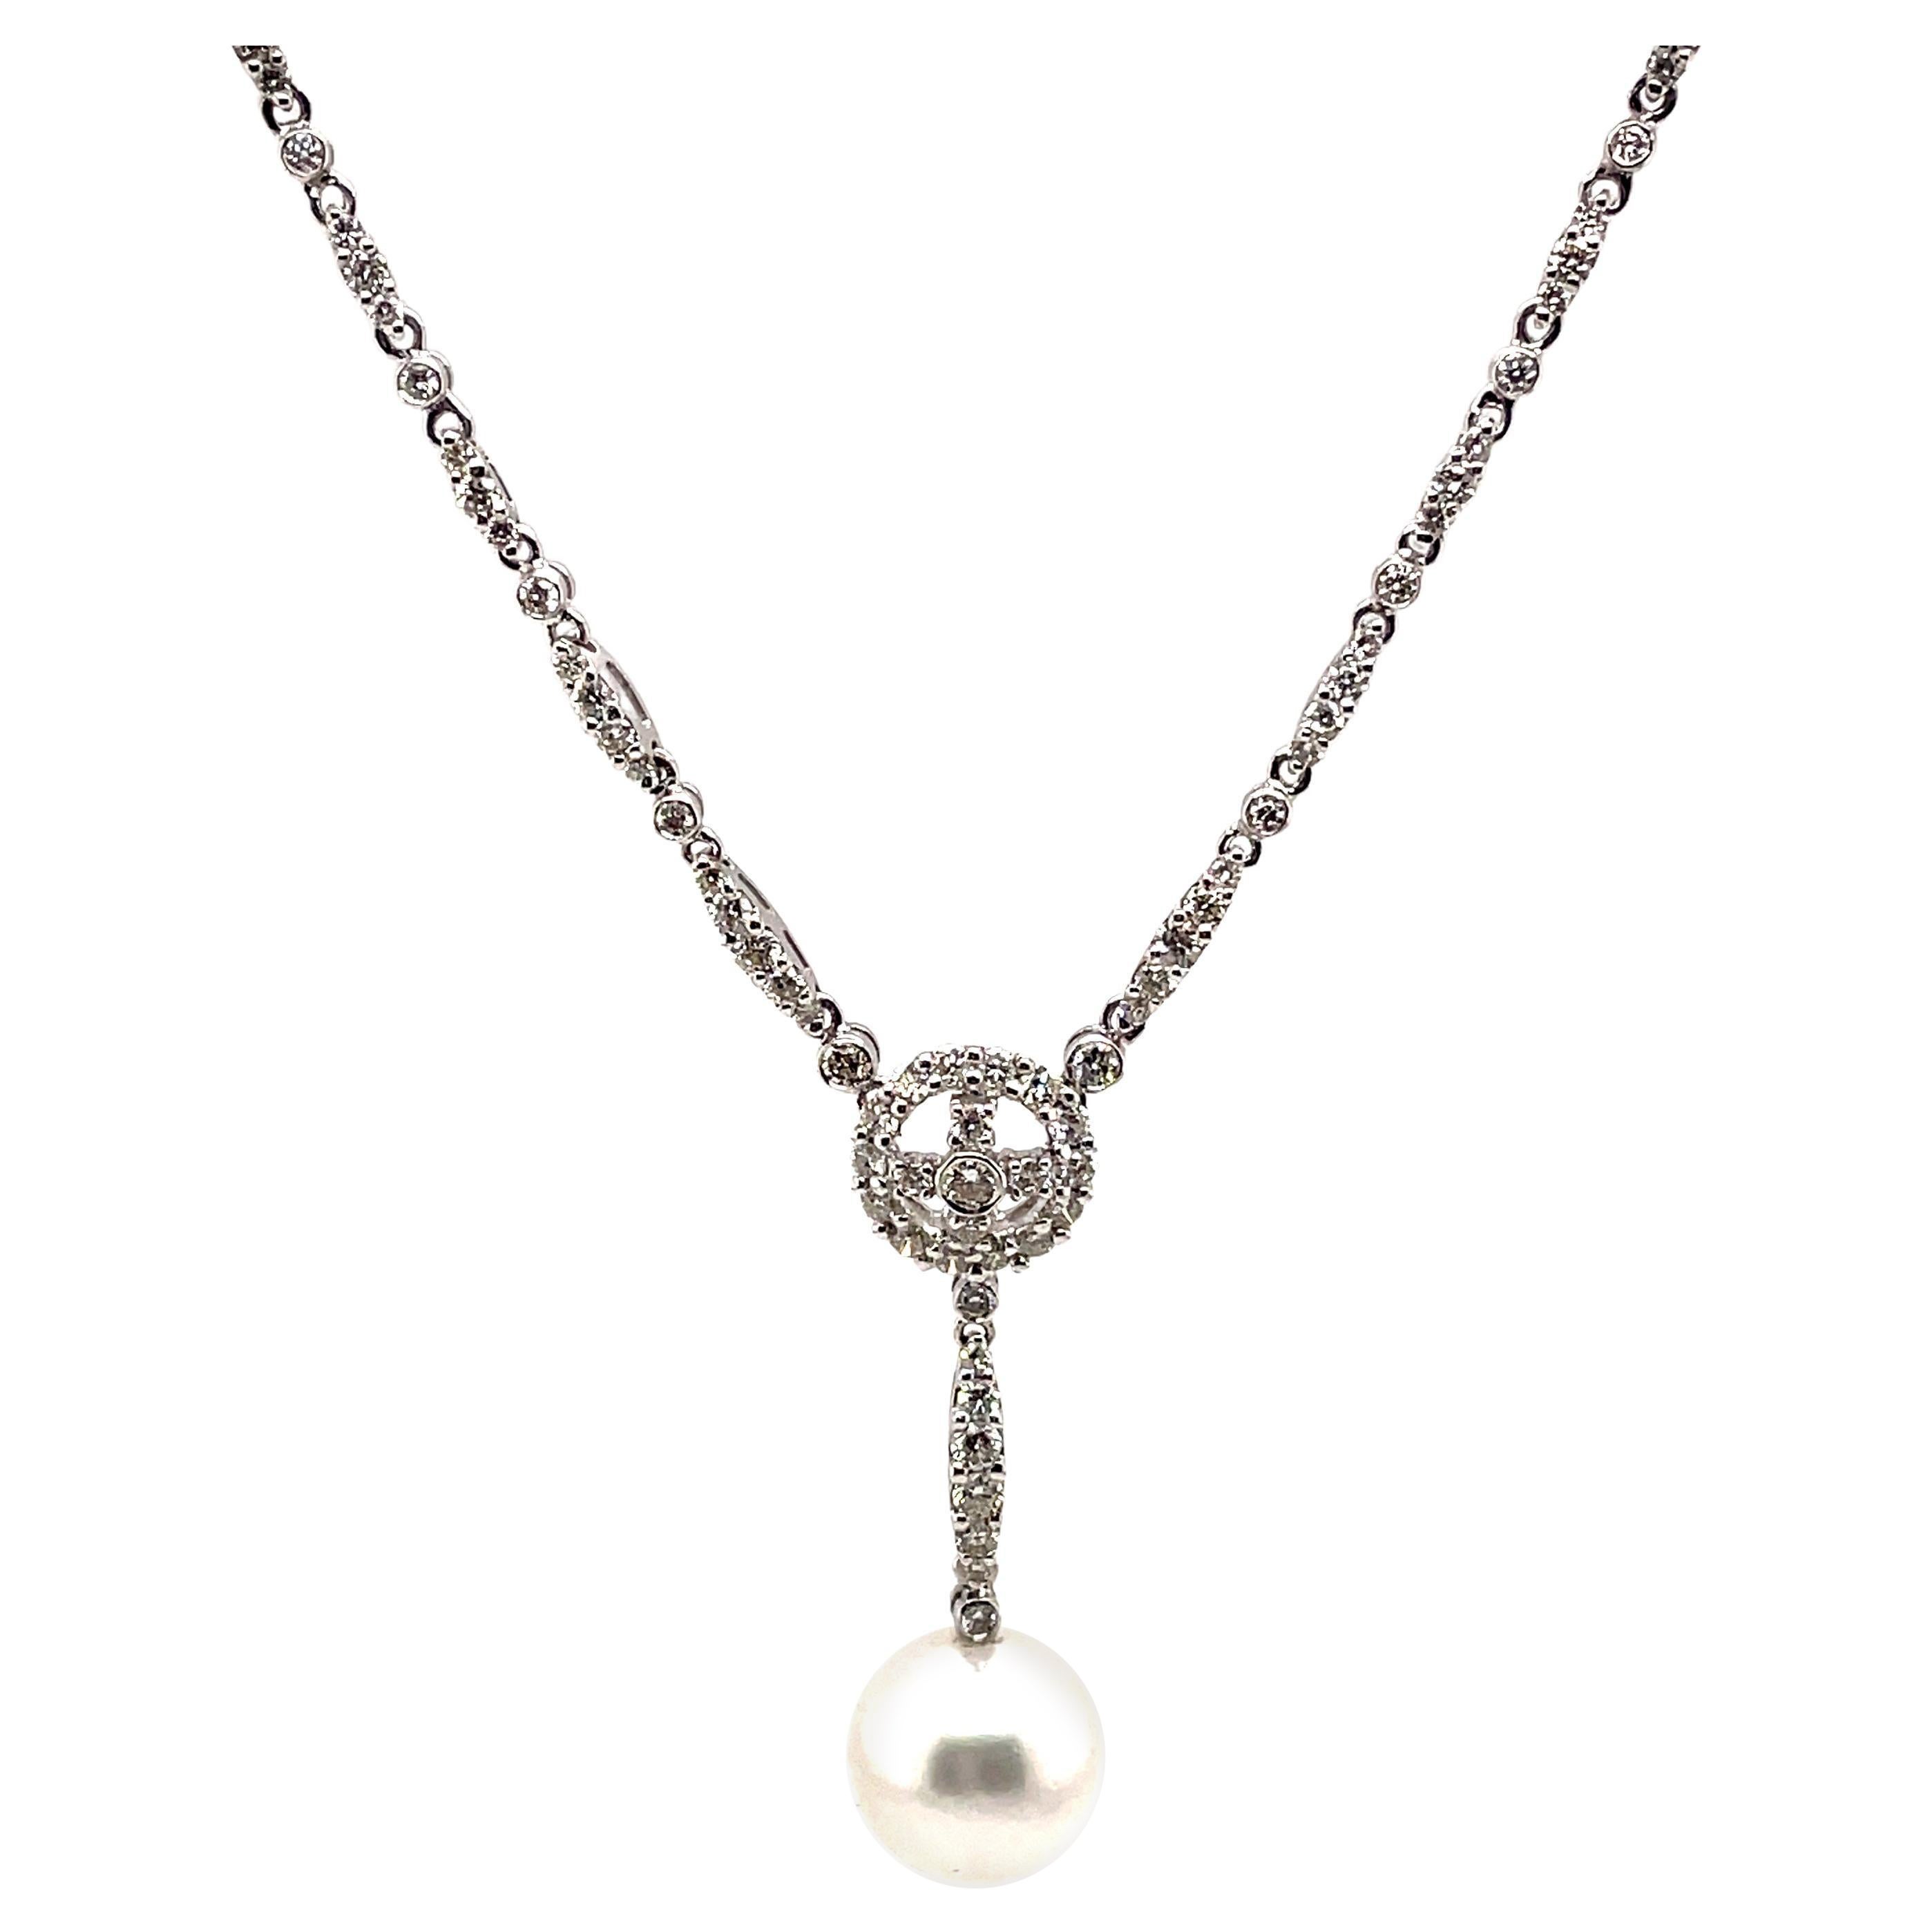 Art Deco Style 2.12ct Diamond Drop Necklace with Pearl 18k White Gold